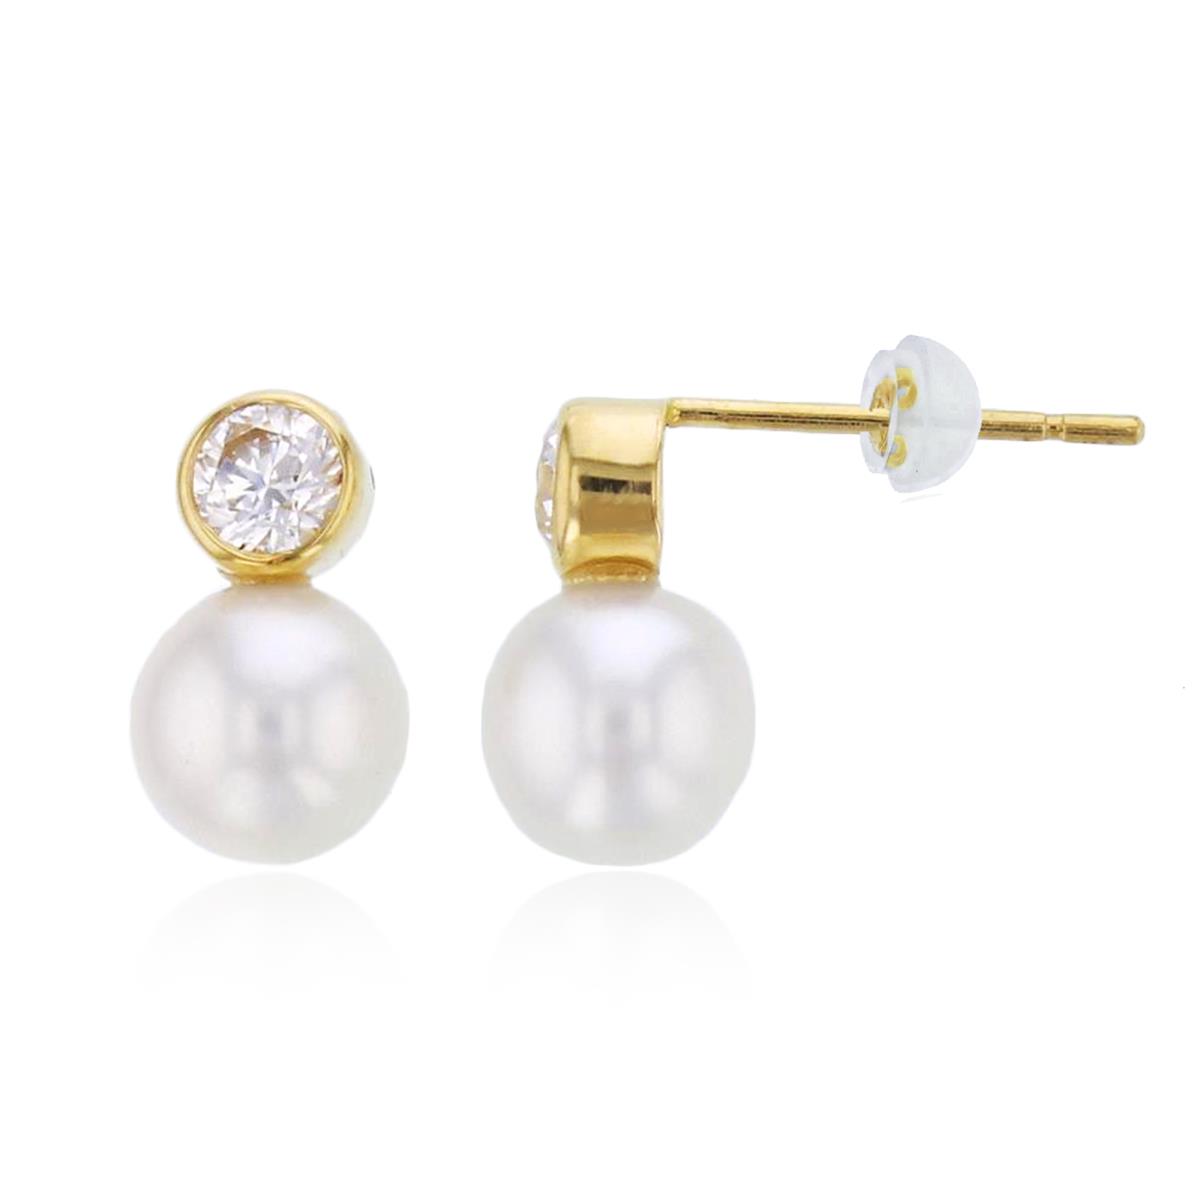 10K Yellow Gold Rnd Bezel CZ & 5mm Fresh Water Pearl Studs with Silicon Backs